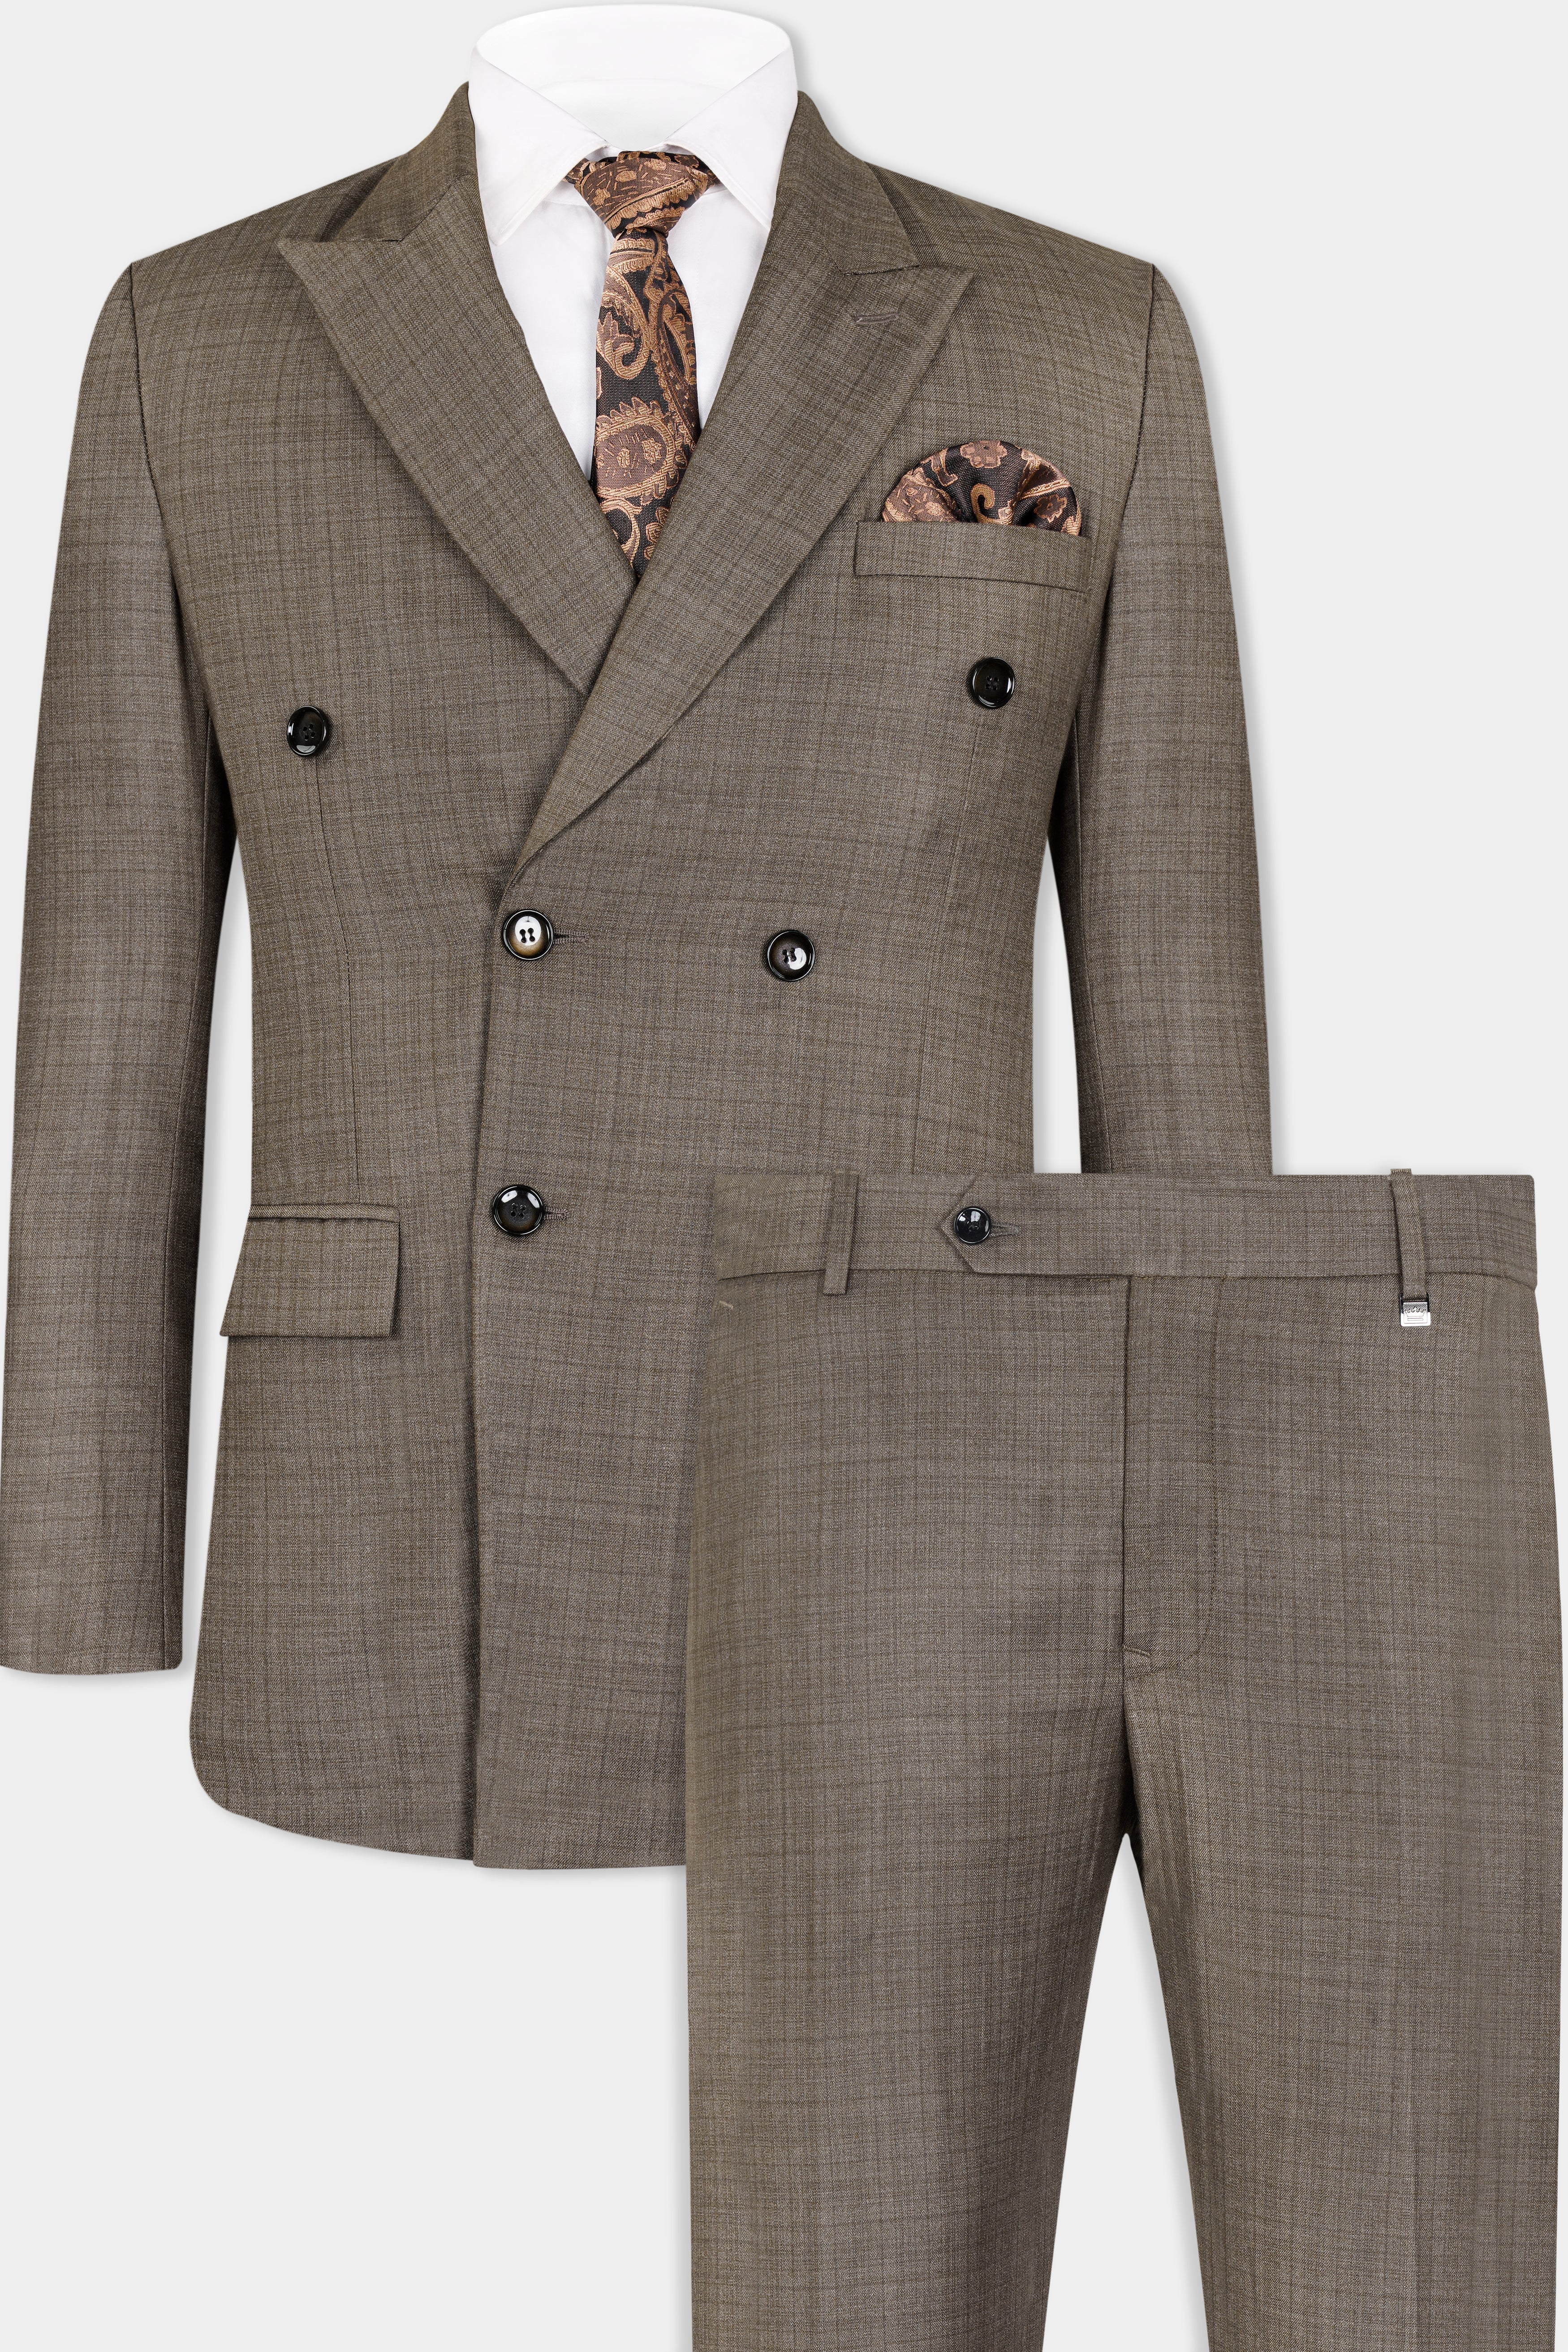 Hemp Brown Checkered Wool Rich Double Breasted Suit ST2935-DB-36, ST2935-DB-38, ST2935-DB-40, ST2935-DB-42, ST2935-DB-44, ST2935-DB-46, ST2935-DB-48, ST2935-DB-50, ST2935-DB-52, ST2935-DB-54, ST2935-DB-56, ST2935-DB-58, ST2935-DB-60